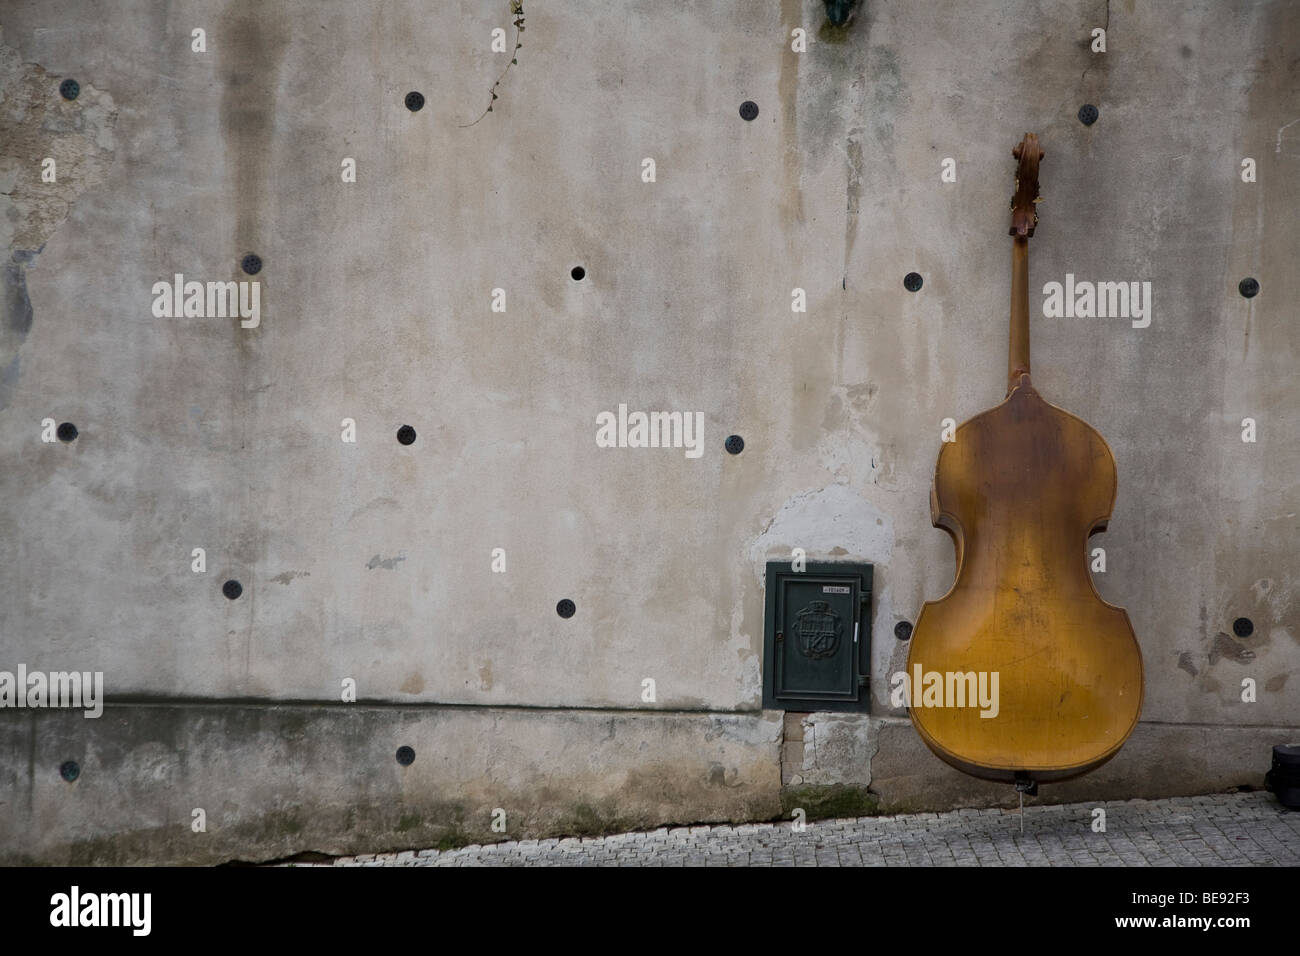 Double bass leaning against wall. Stock Photo